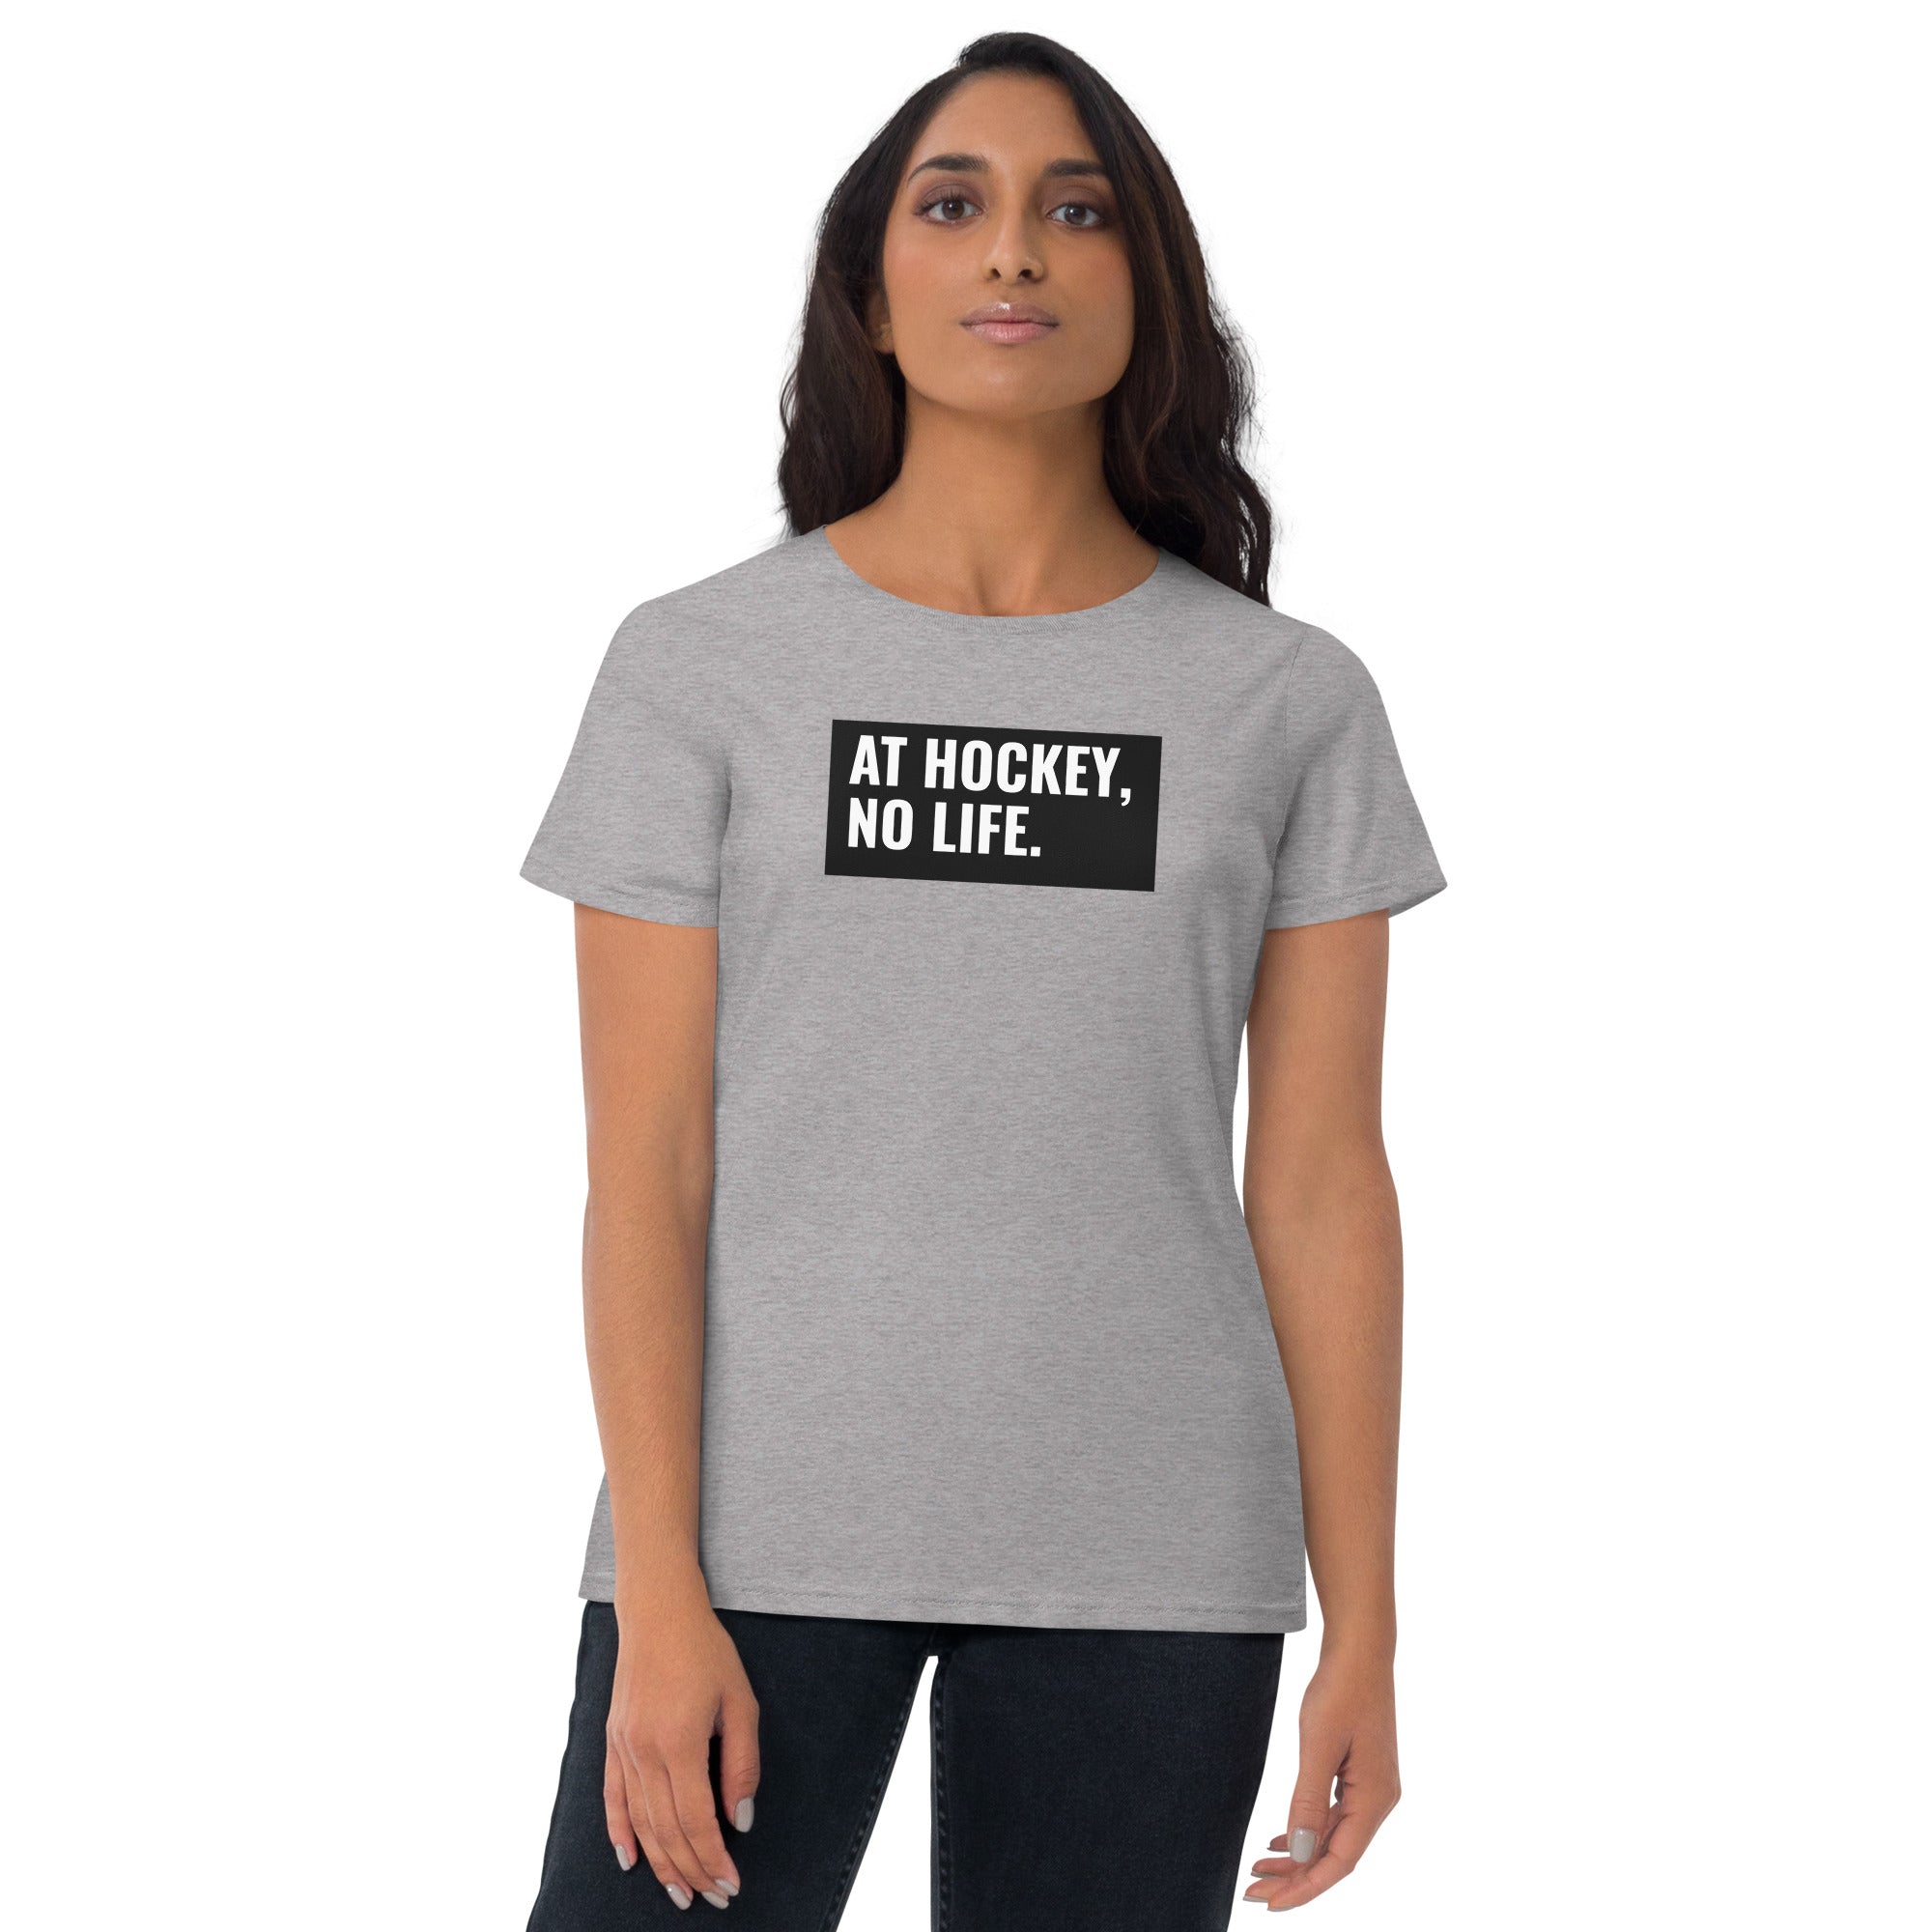 At Hockey, No Life Women's Fitted T-Shirt